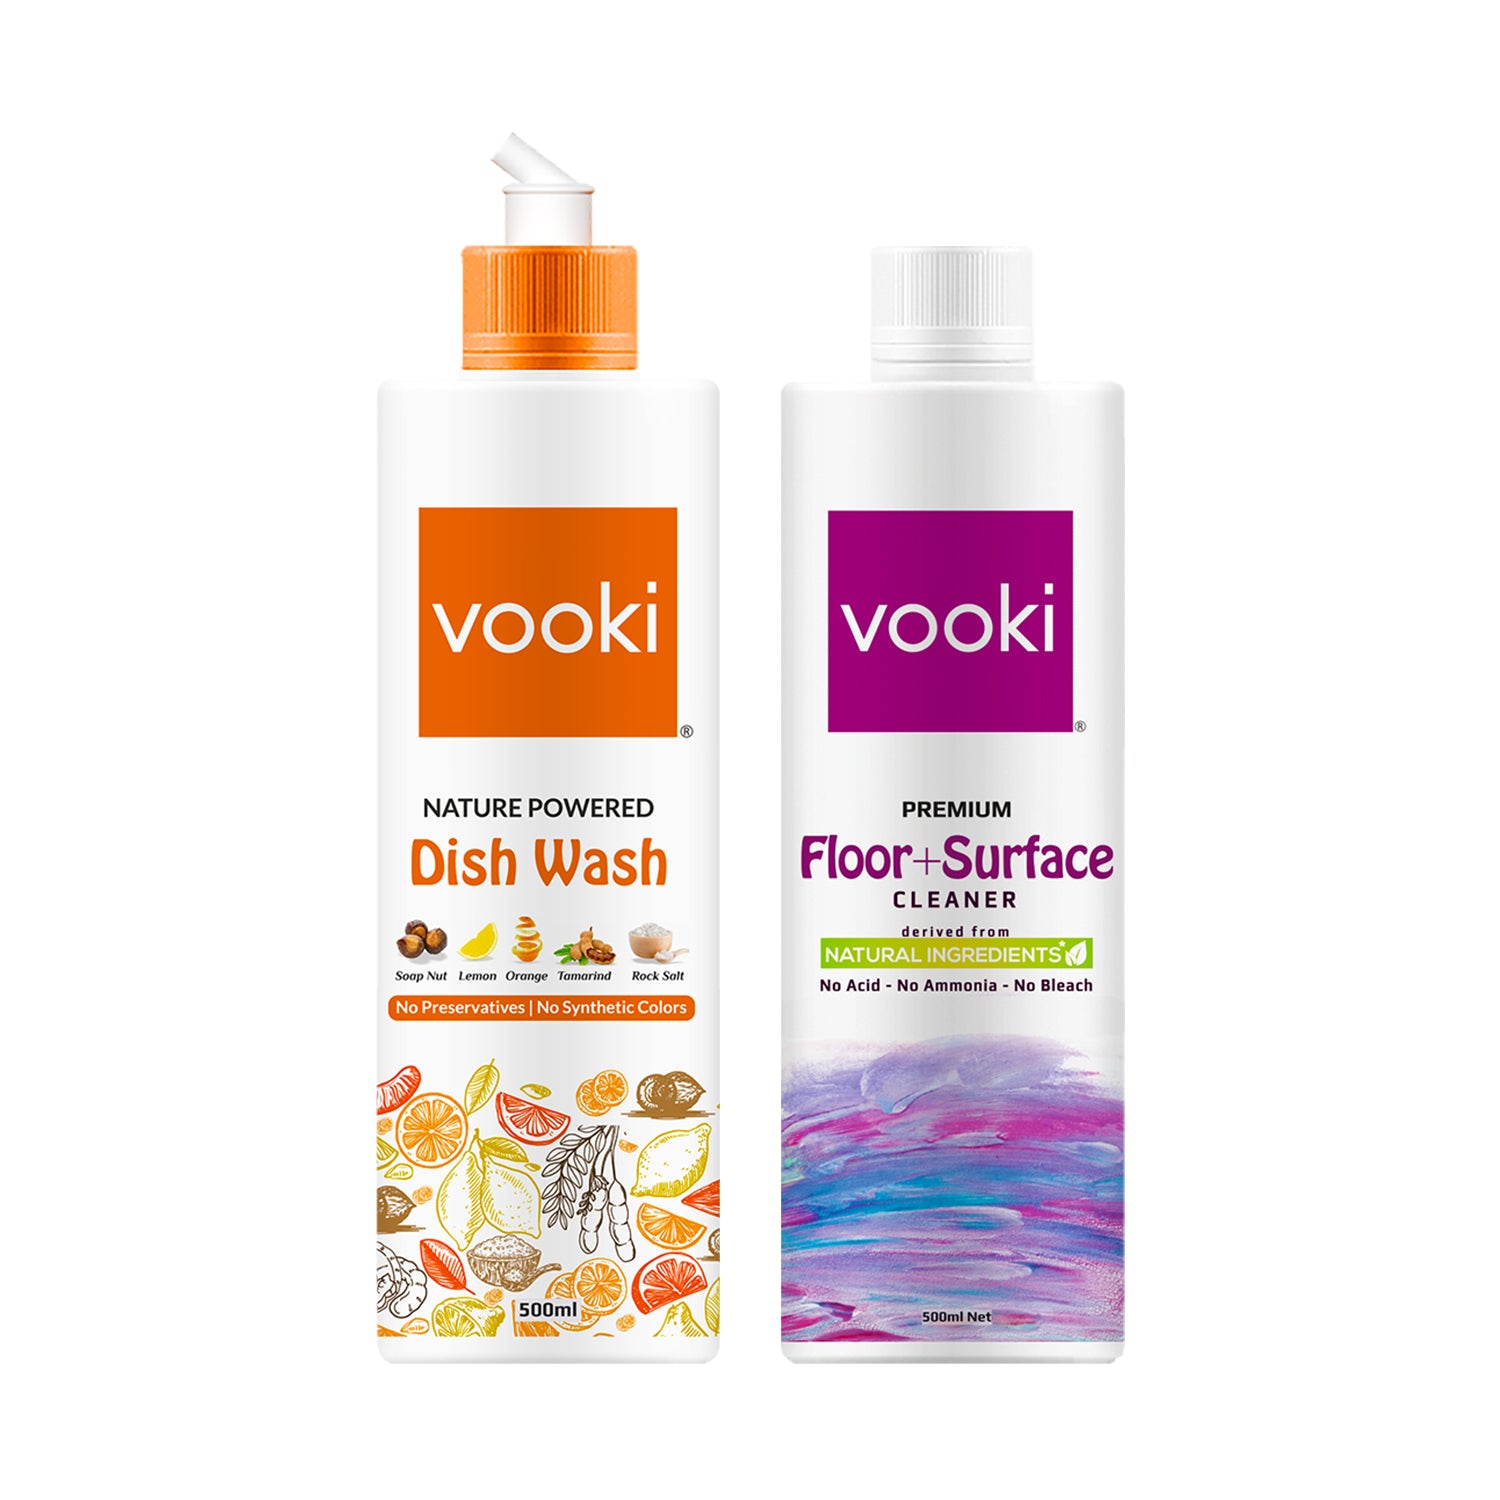 Image of vooki natural cleaning products, featuring eco-friendly ingredients for effective and safe cleaning.